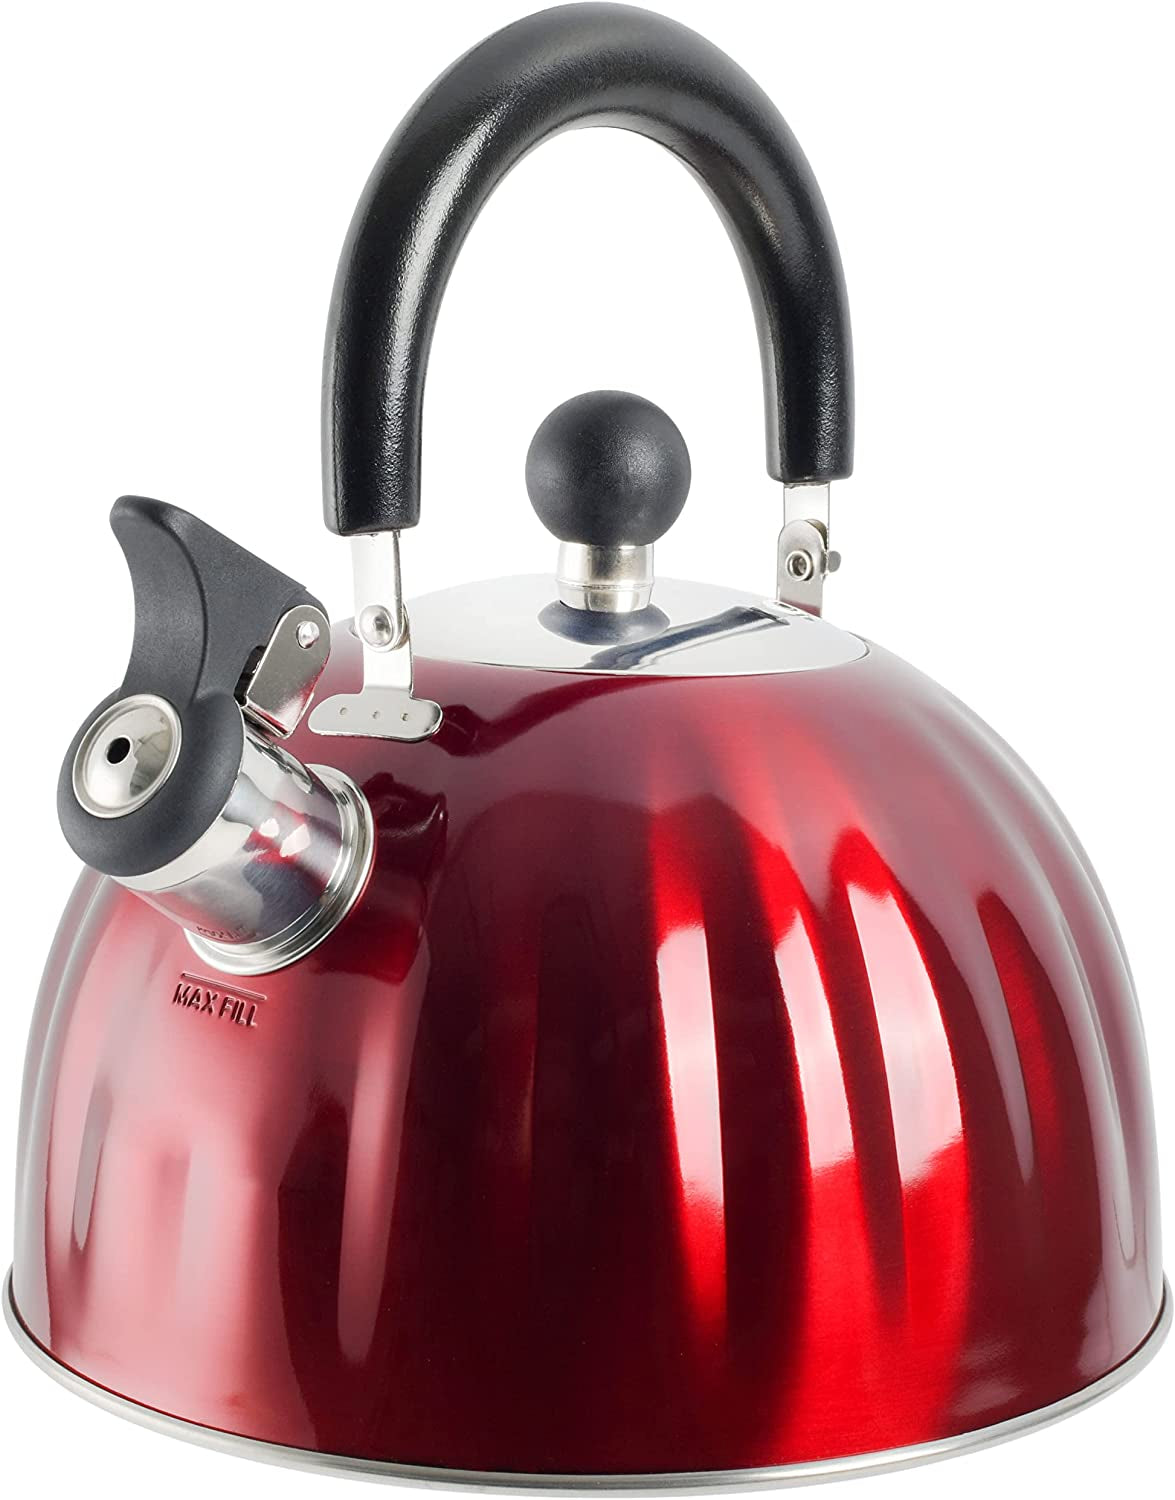 Mr. Coffee Twining 2.1 Quart Pumpkin Shaped Stainless Steel Whistling Tea Kettle, Metallic Red